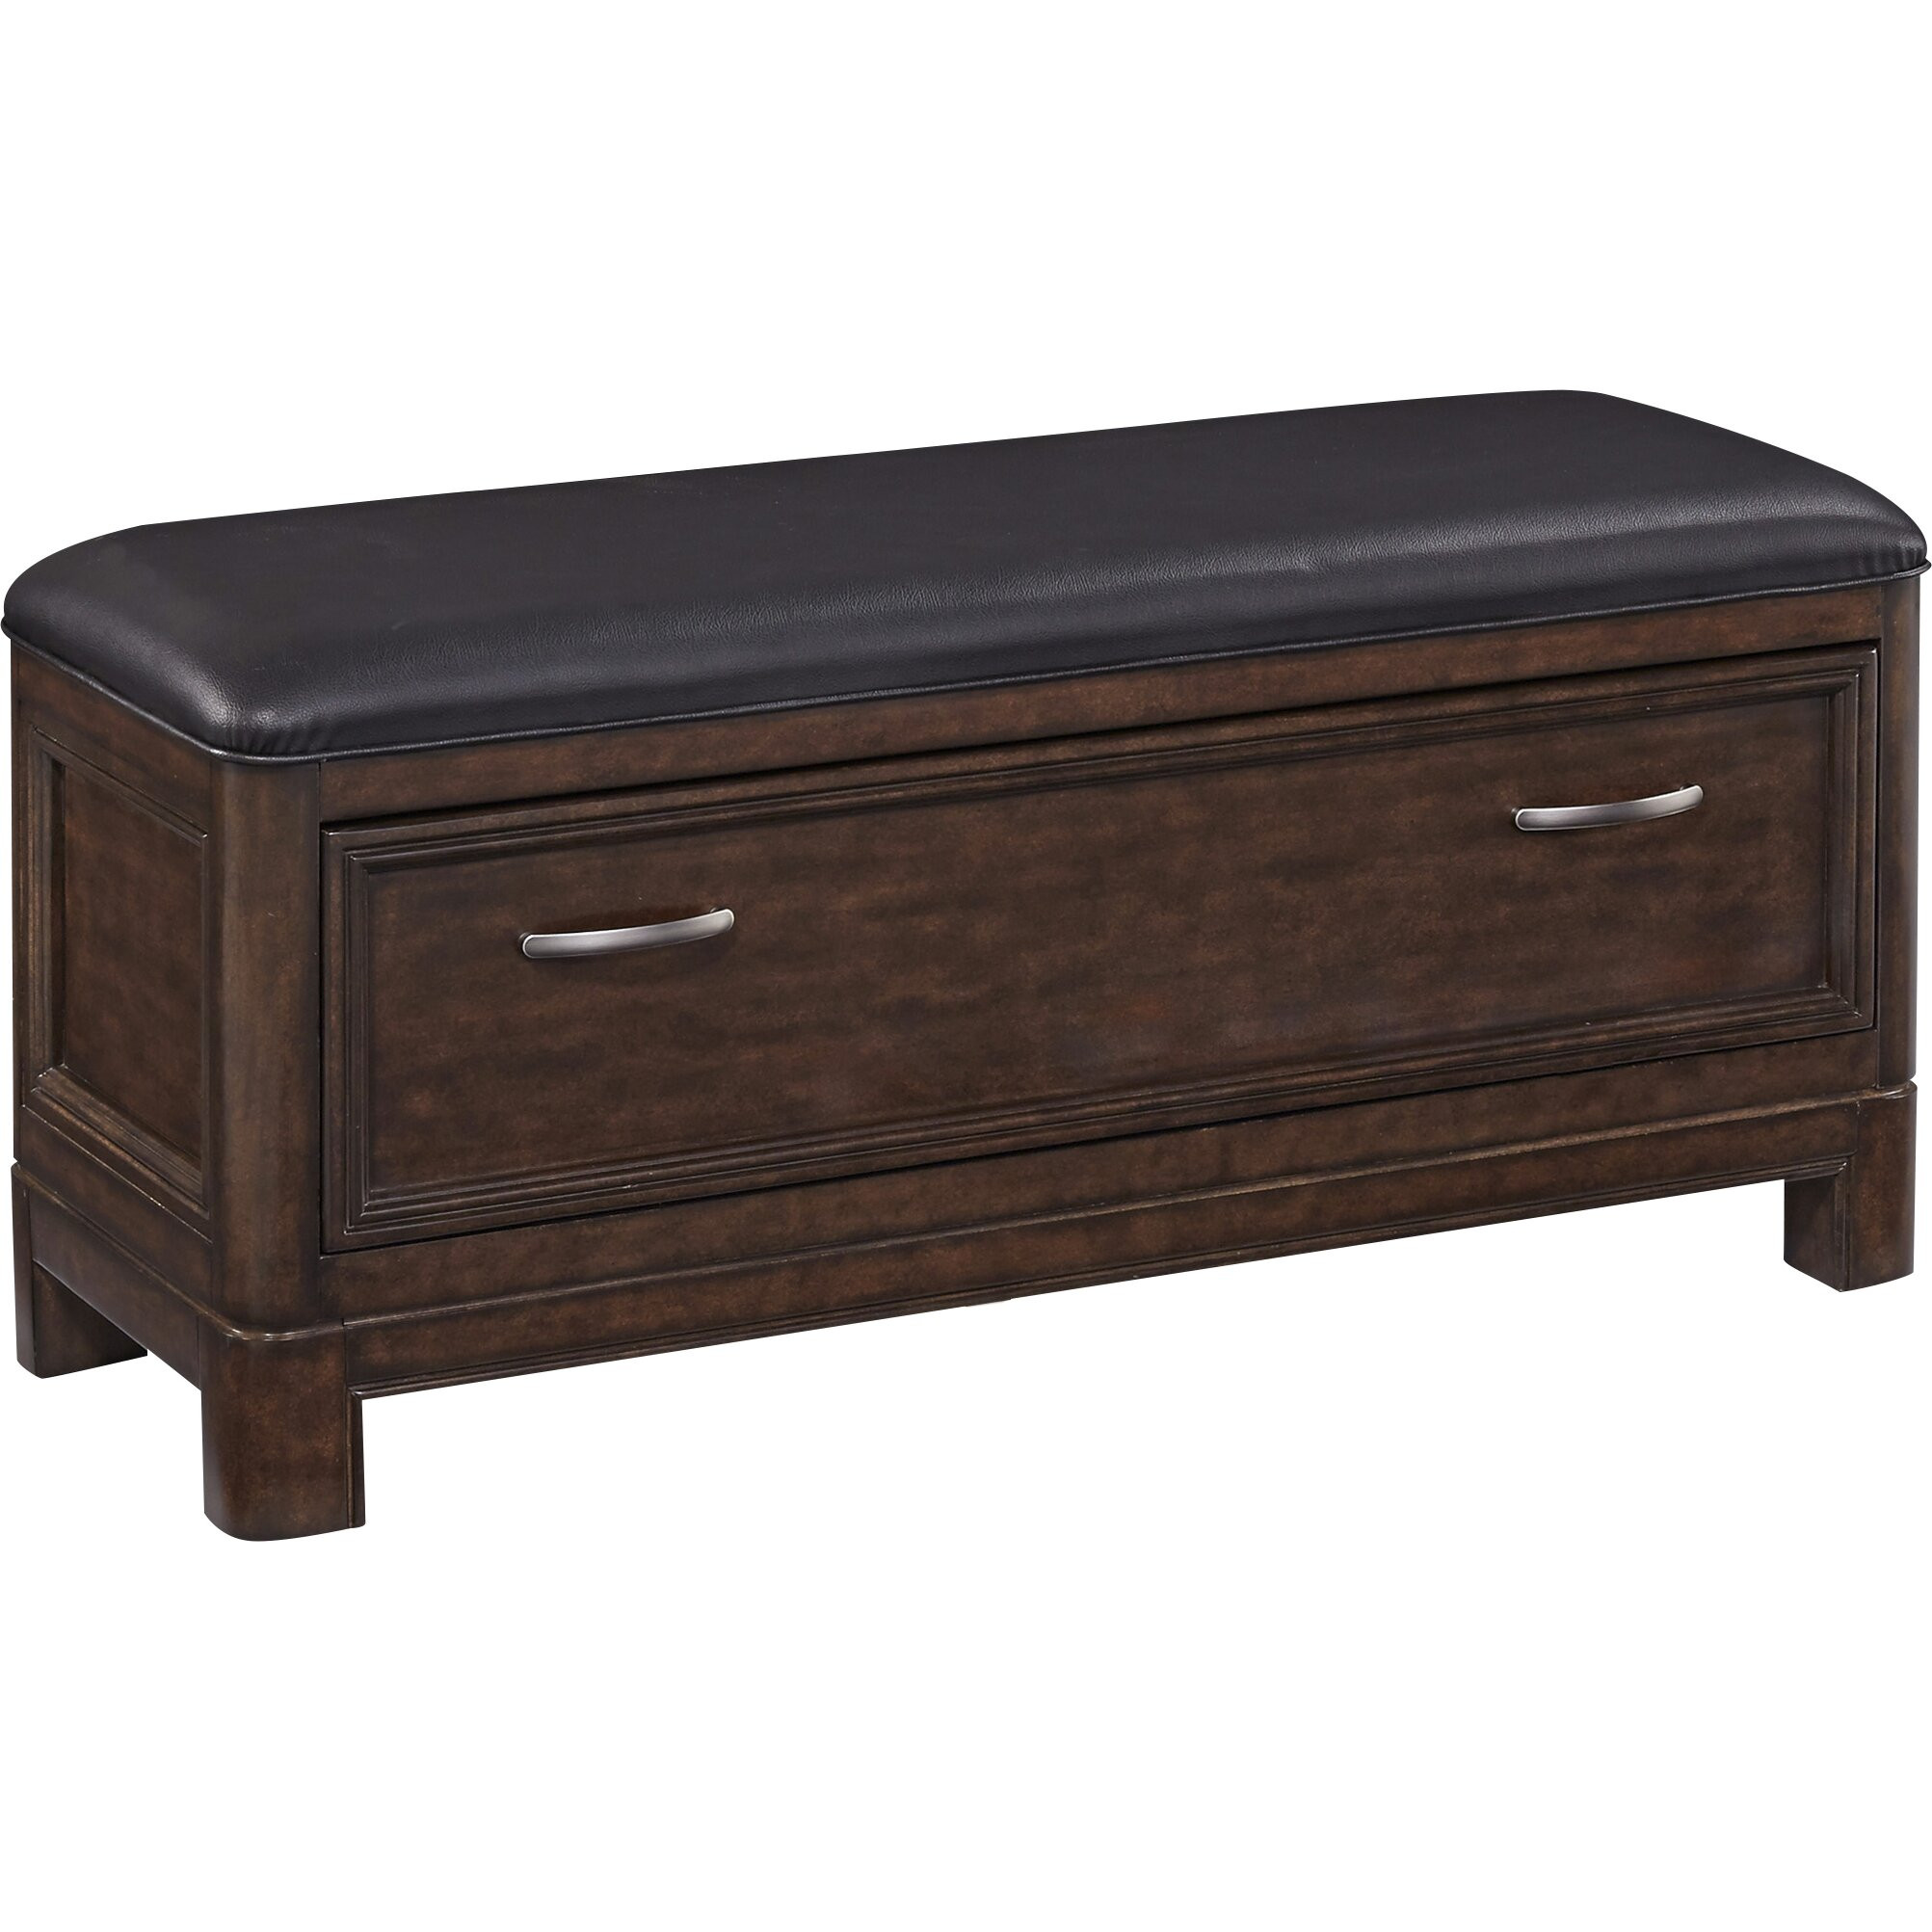 Leather Bench With Storage
 Home Styles Crescent Hill Genuine Leather Storage Entryway